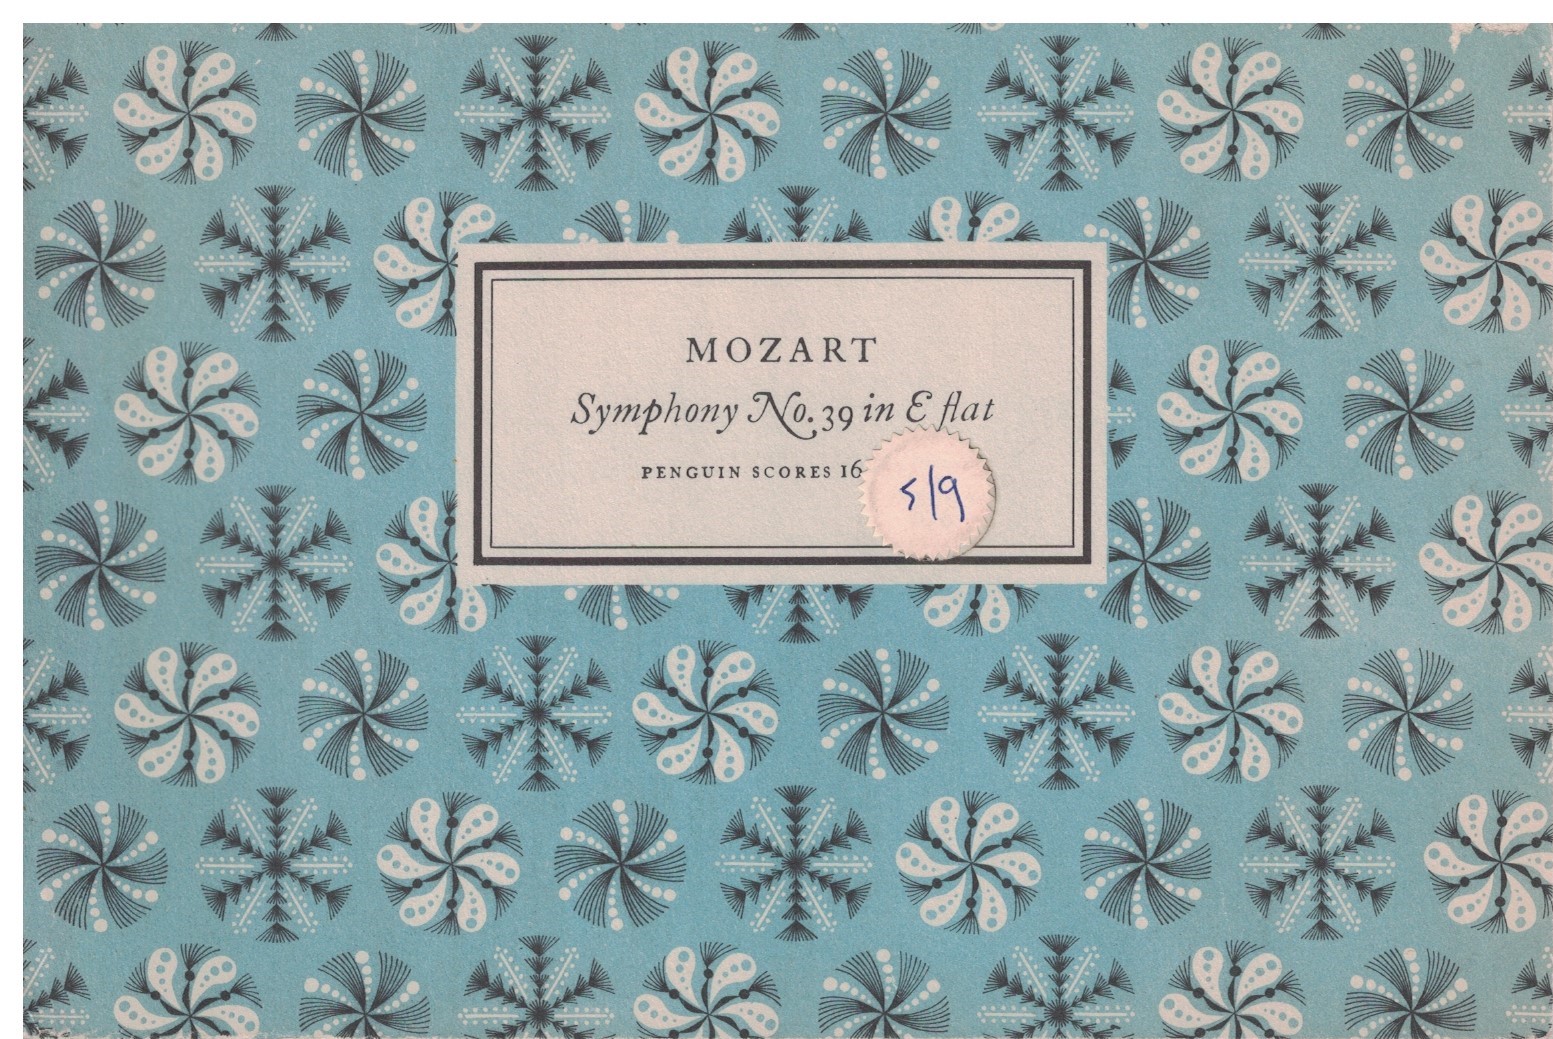 Mozart Symphony No.39 in E flat for Orchestra Miniature Study Score